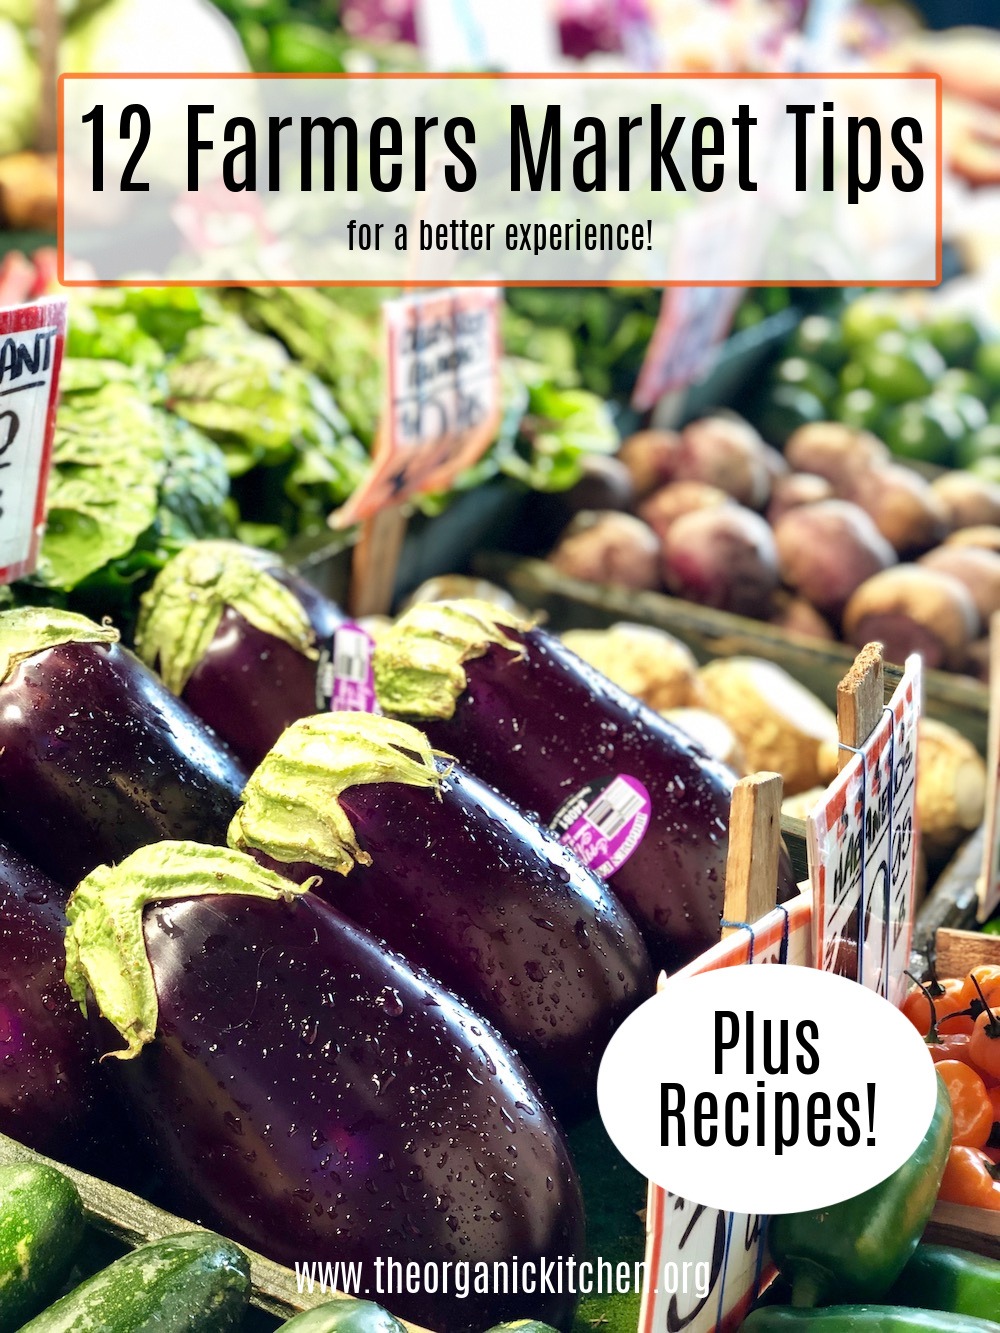 12 Helpful Farmers Market Tips!: An array of colorful vegetables in farmers market stands